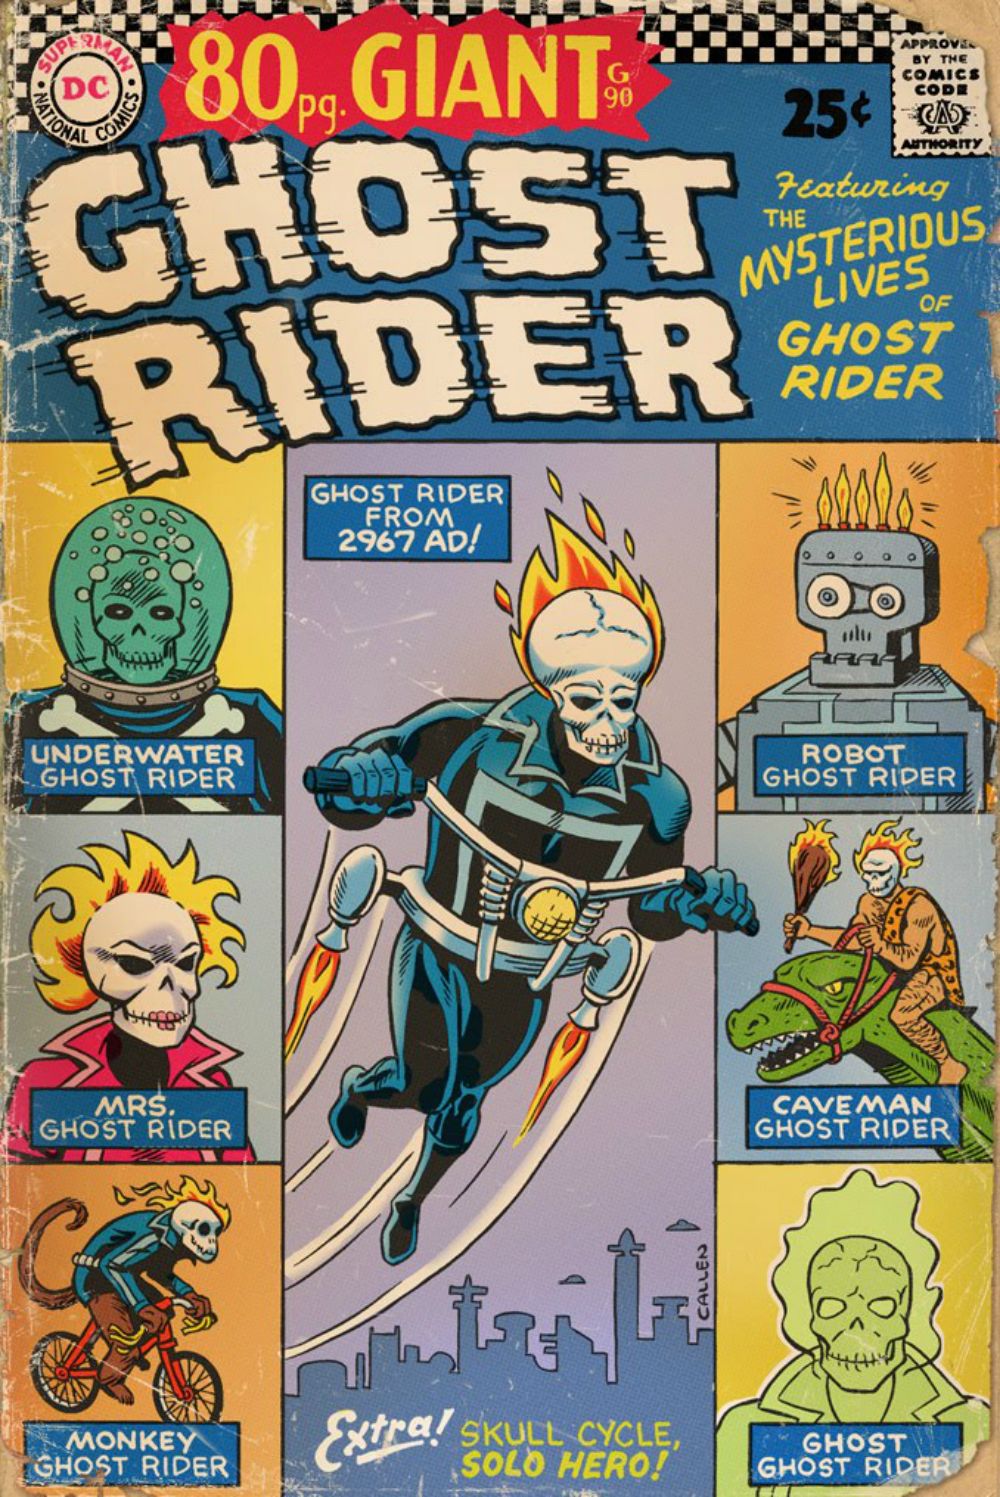 dc-ghost-rider-80-page-giant